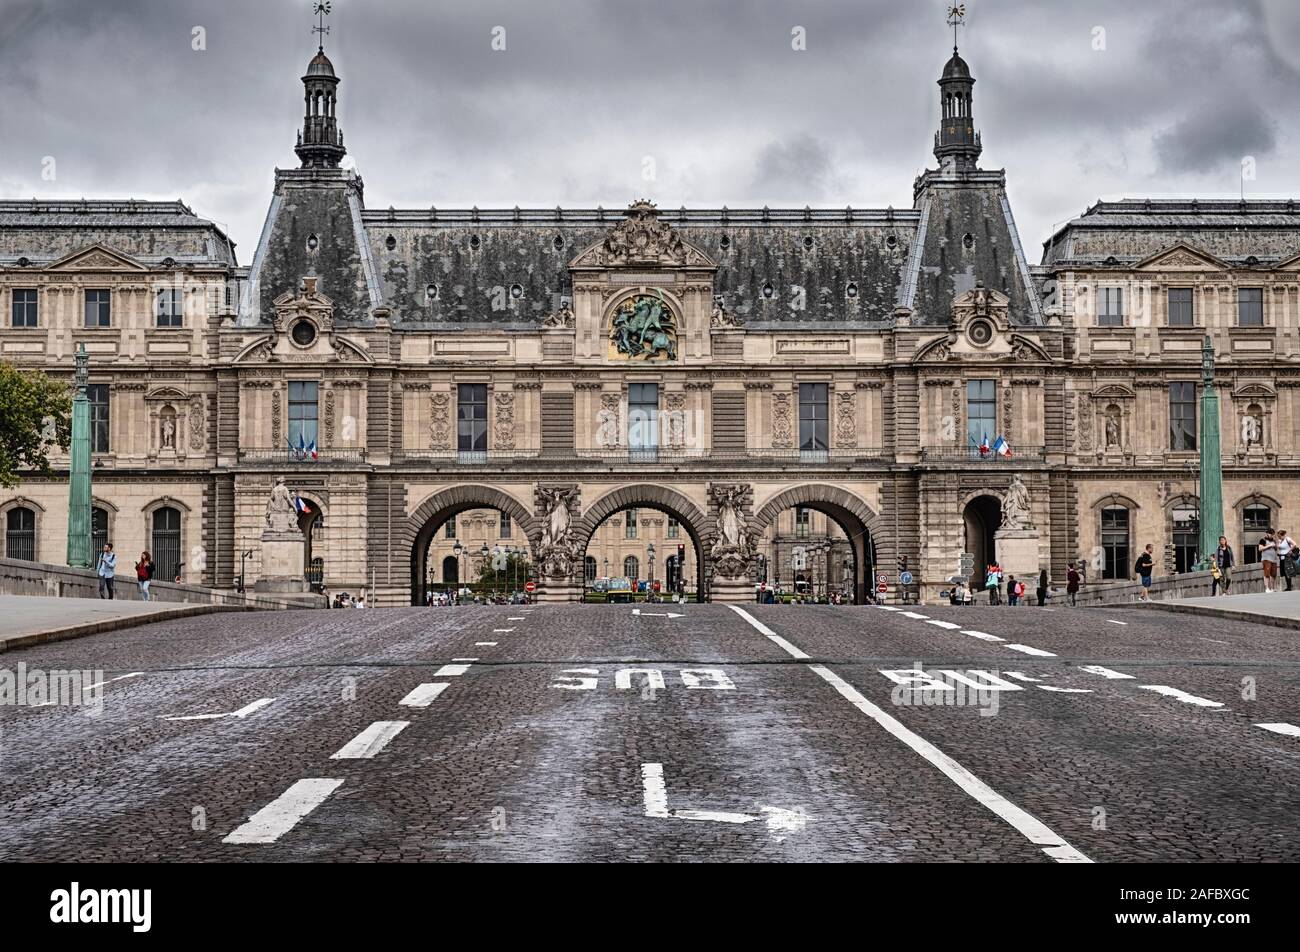 Street lanes on a bridge over the Seine River lead from and to the Louvre Palace in Paris. Stock Photo